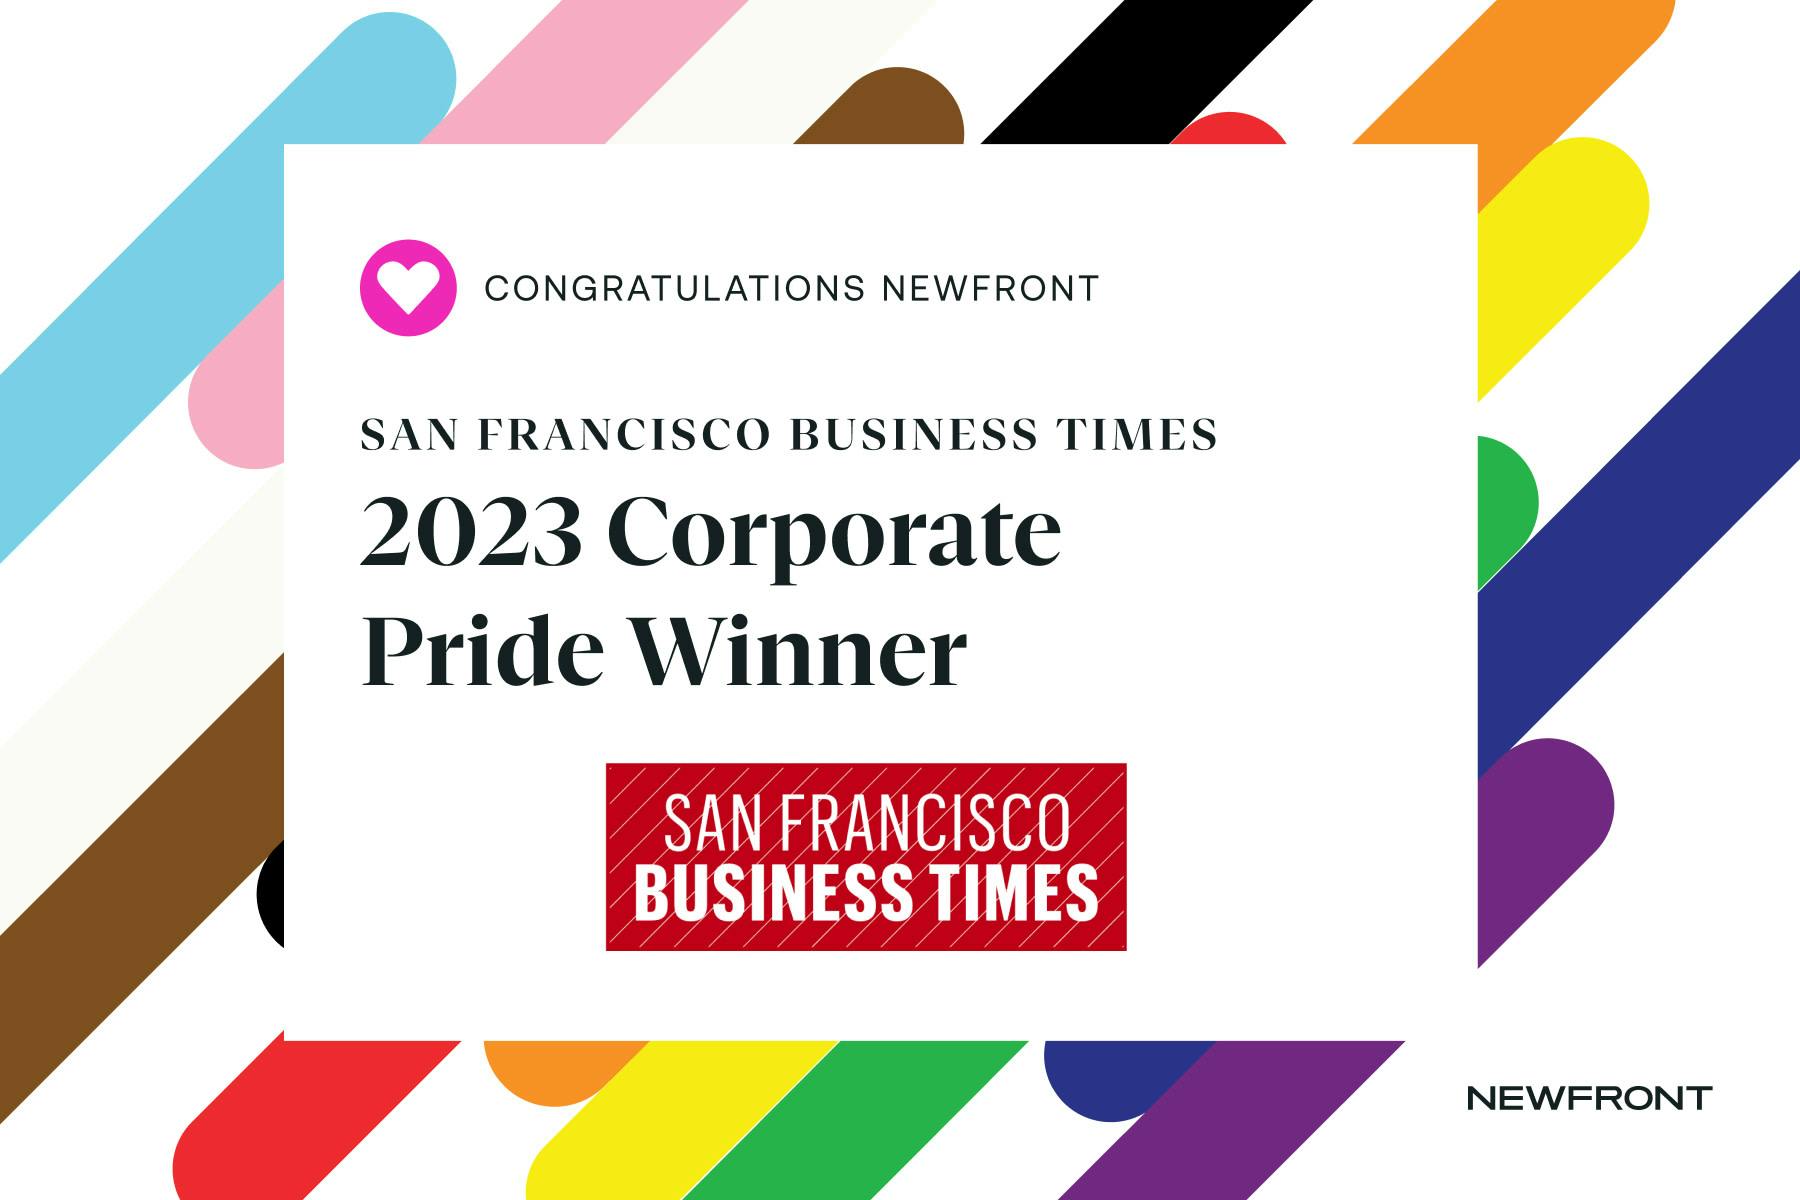 Newfront is San Francisco Business Times 2023 Corporate Pride Winner